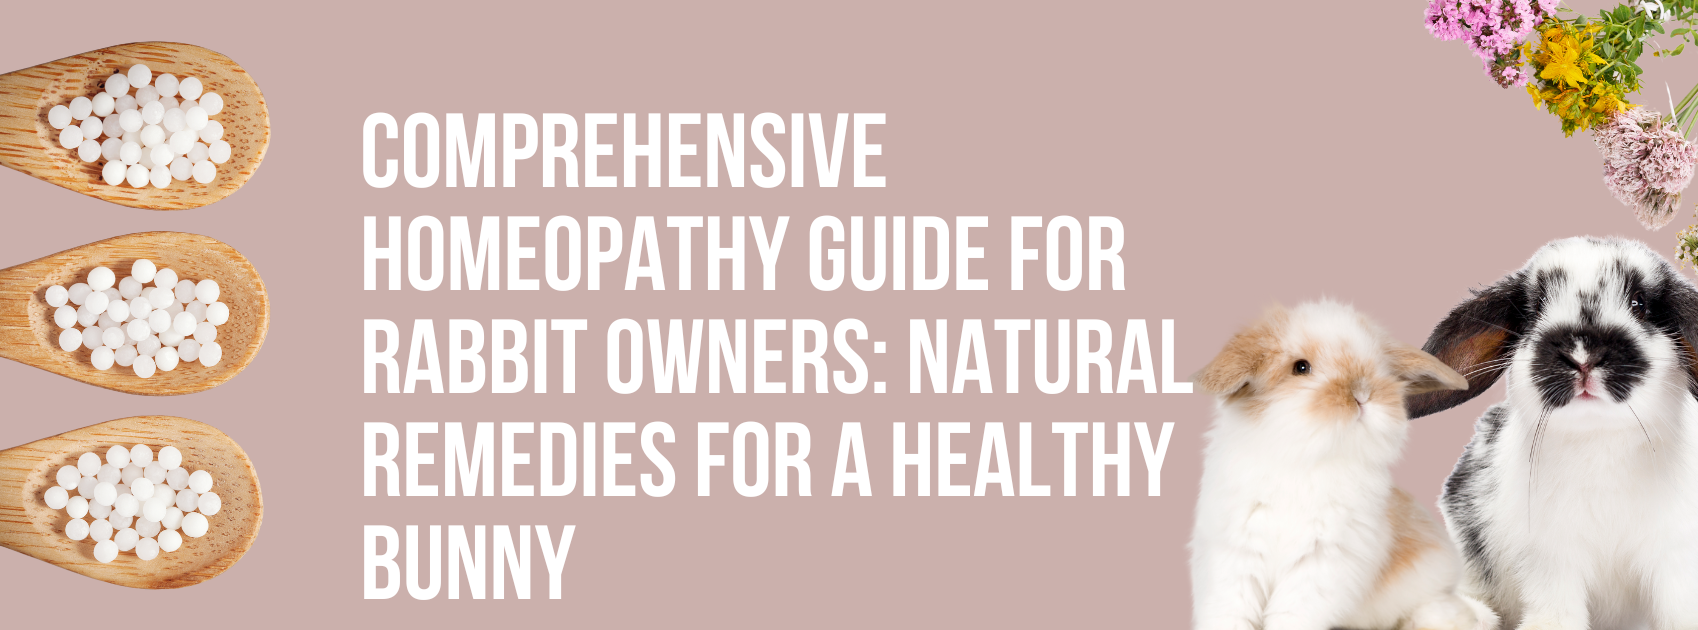 Comprehensive Homeopathy Guide for Rabbit Owners: Natural Remedies for a Healthy Bunny